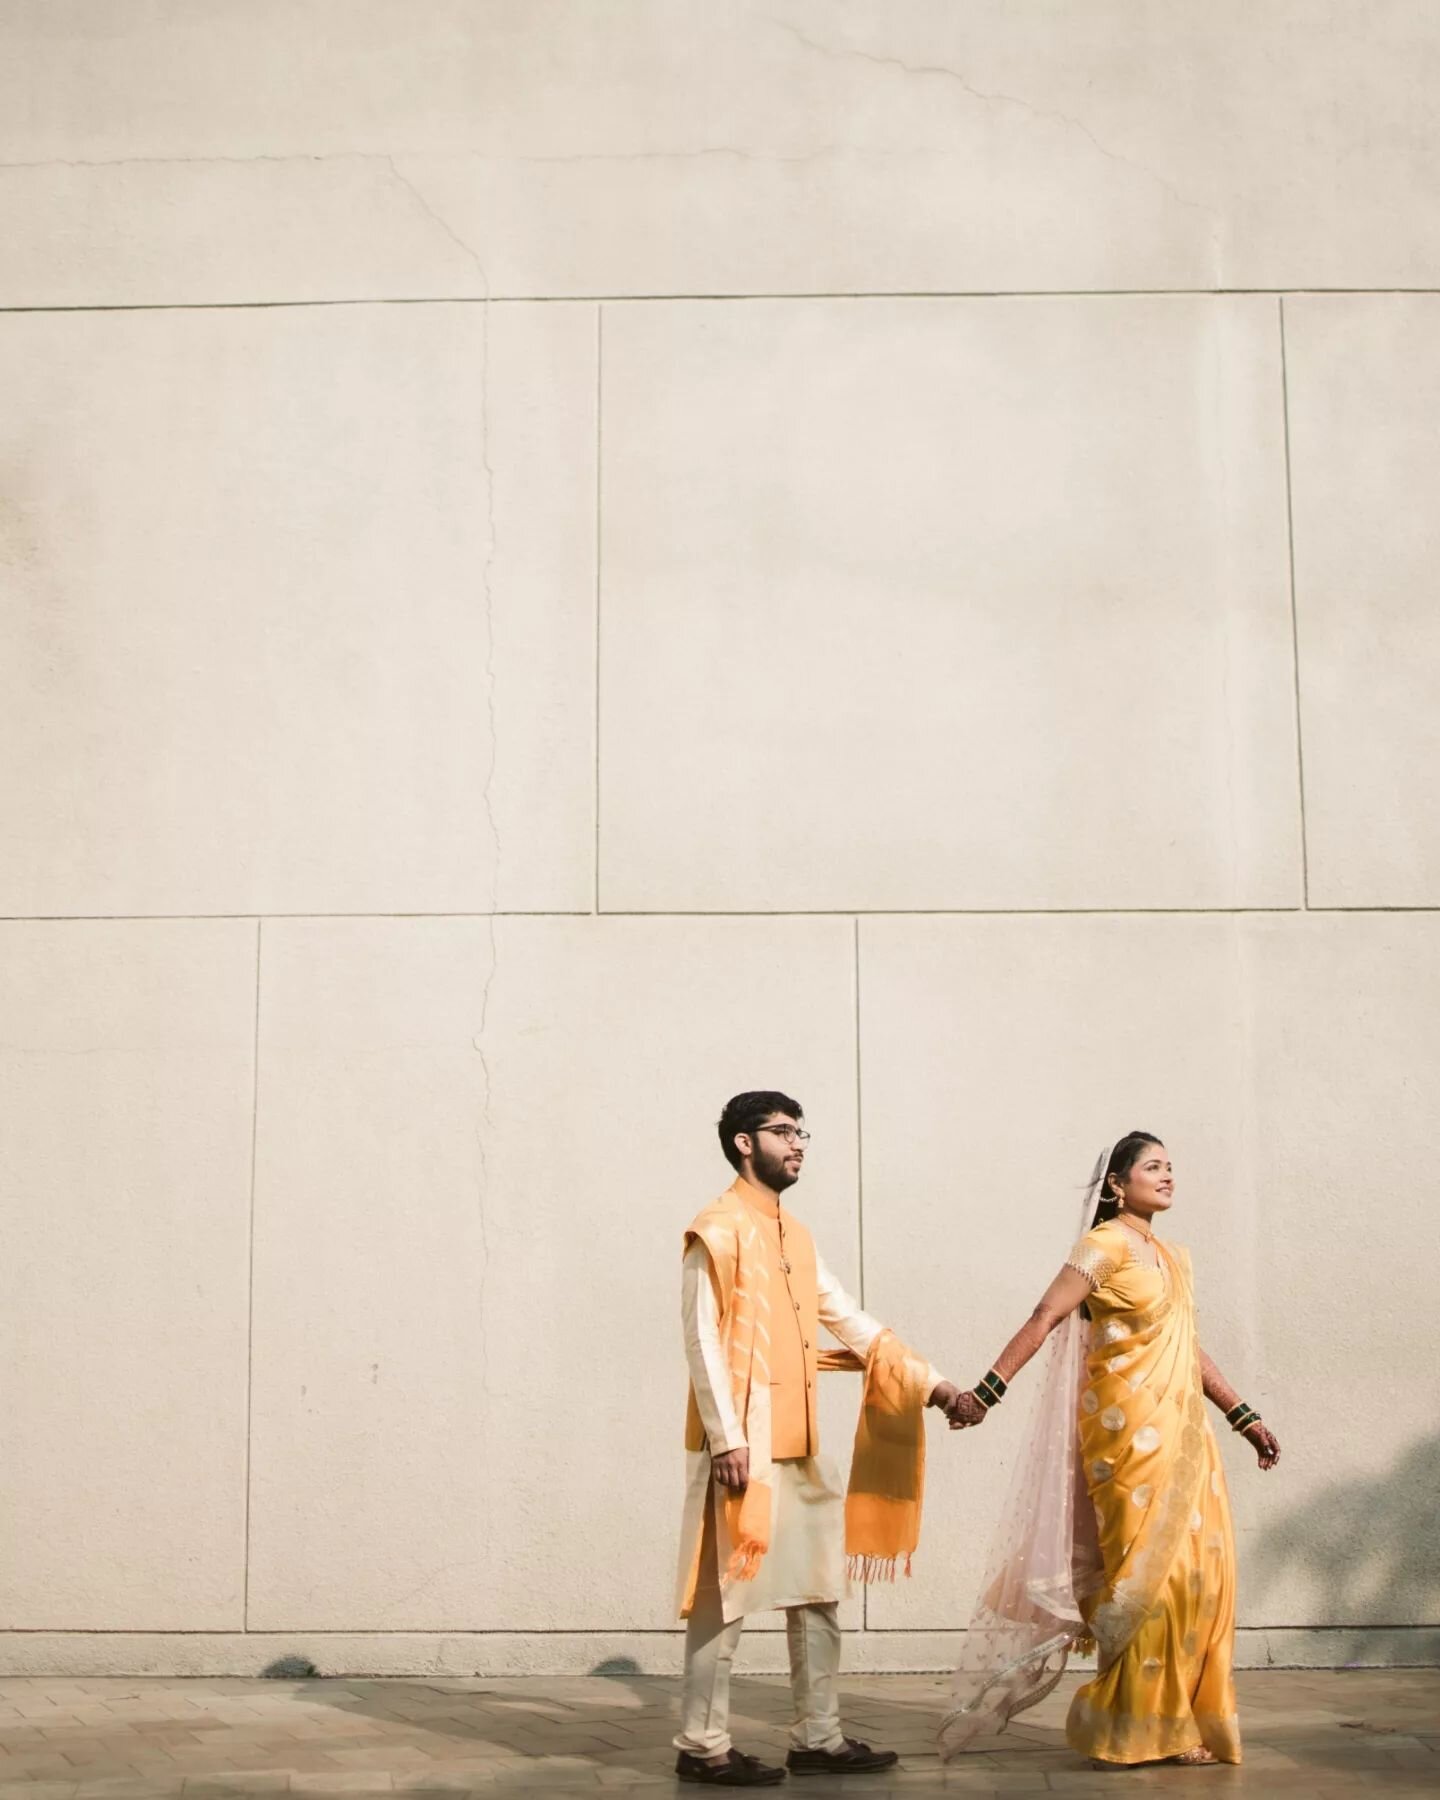 &quot;As the countdown to my wedding ticks away, my mind's doing a wild dance! Anshuman's got this impeccable punctuality game, and here I am, struggling to be on time for, well, anything! I'm just hoping to channel some of his timeliness mojo before